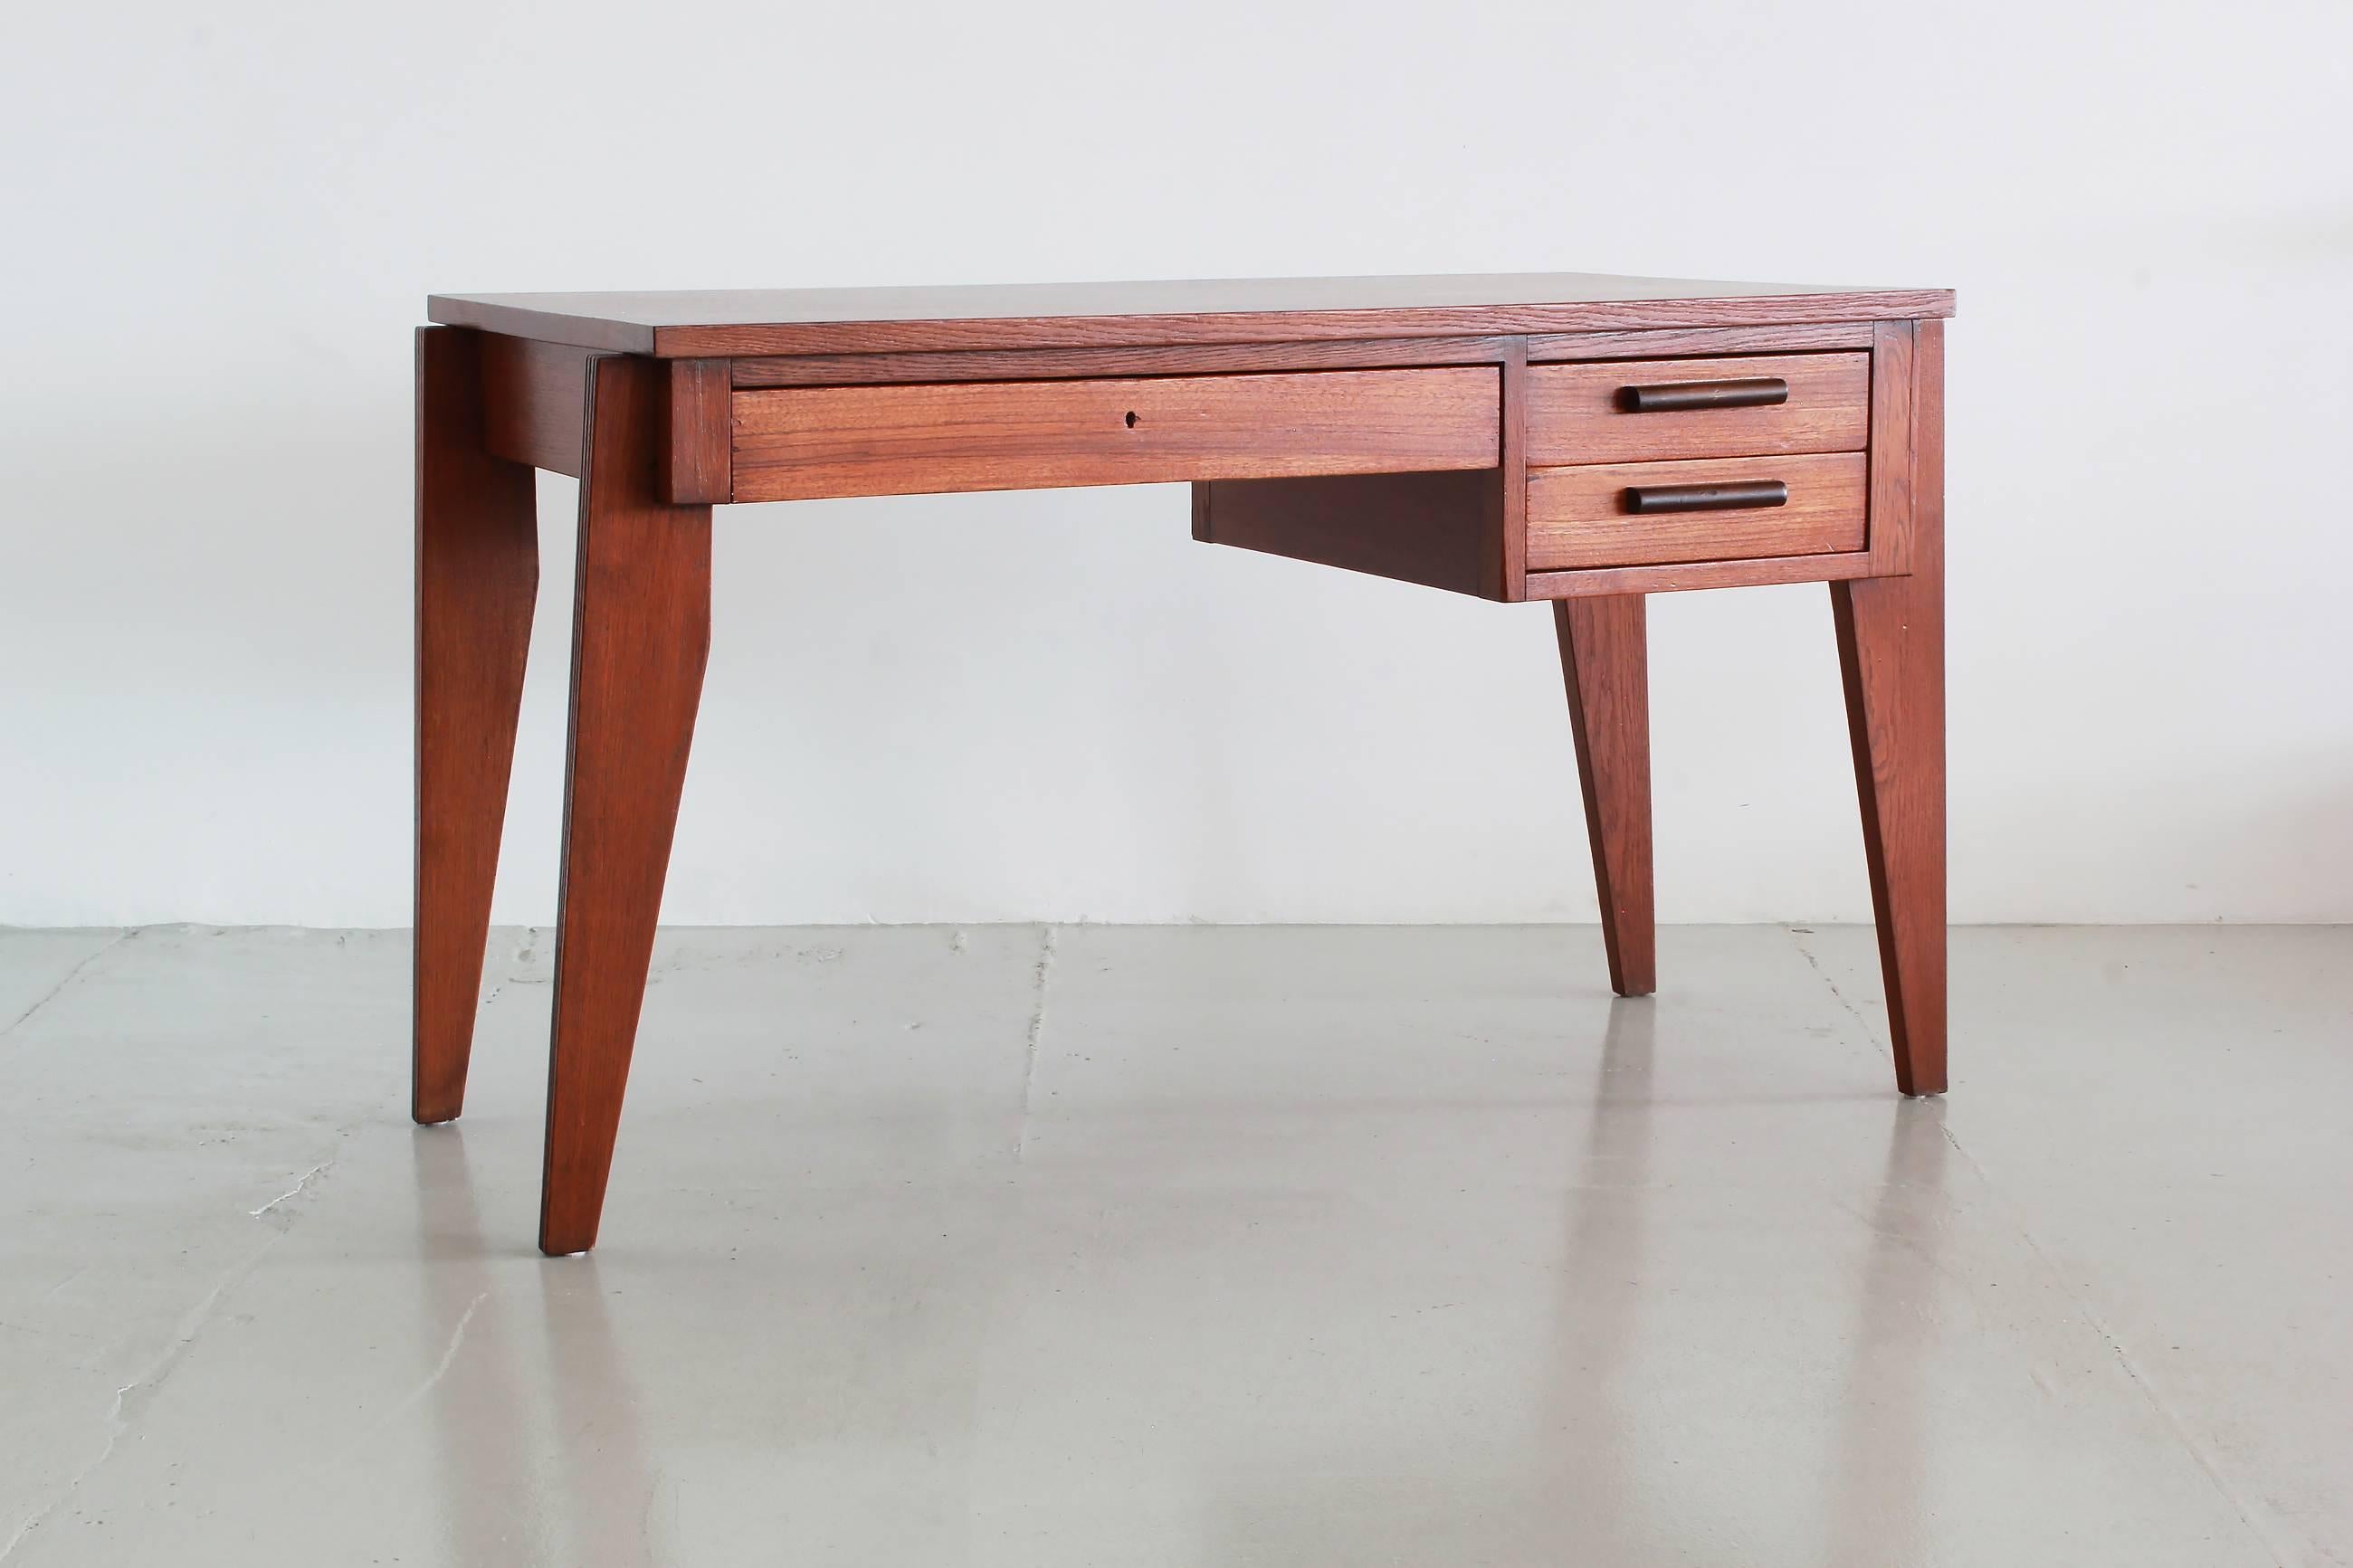 Wonderful desk by French designer Andre Sornay.
Warm French oak with contrasting wood handles on two drawers and pencil centre drawer.
Prouve style angled legs.
Fantastic piece!
    